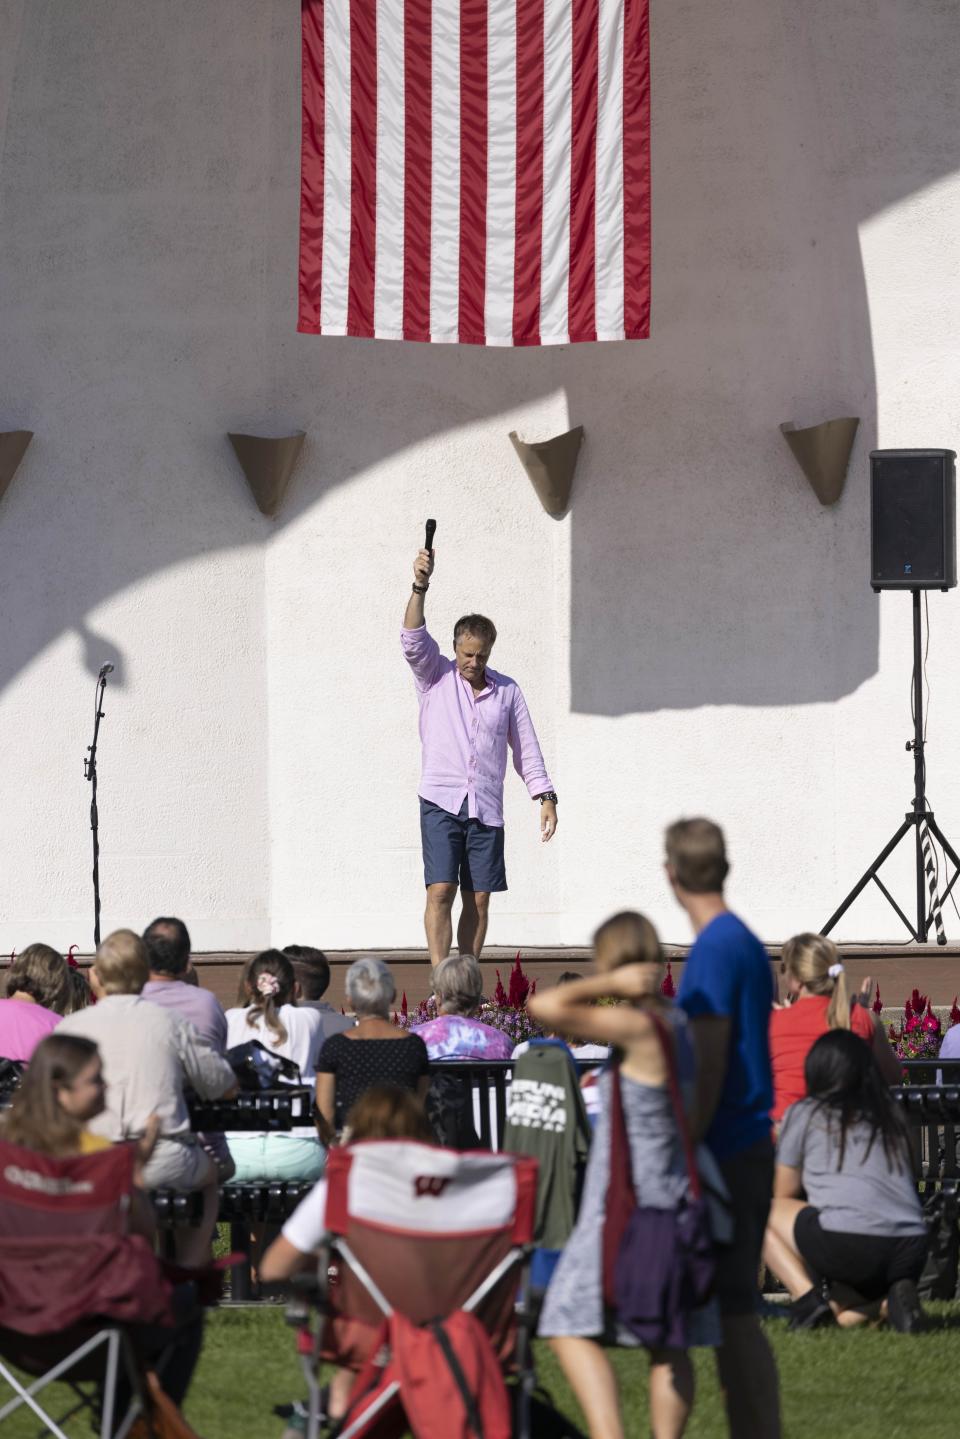 Wade Anunson, president of the Chiropractic Society of Wisconsin, speaks at the Chiropractic Society Health Freedom revival Sunday, Sept. 19, 2021 in Oconomowoc, Wis. Participants paid $20 per ticket to hear speakers talk about “health freedom” and the risks of vaccines. (AP Photo/Jeffrey Phelps)